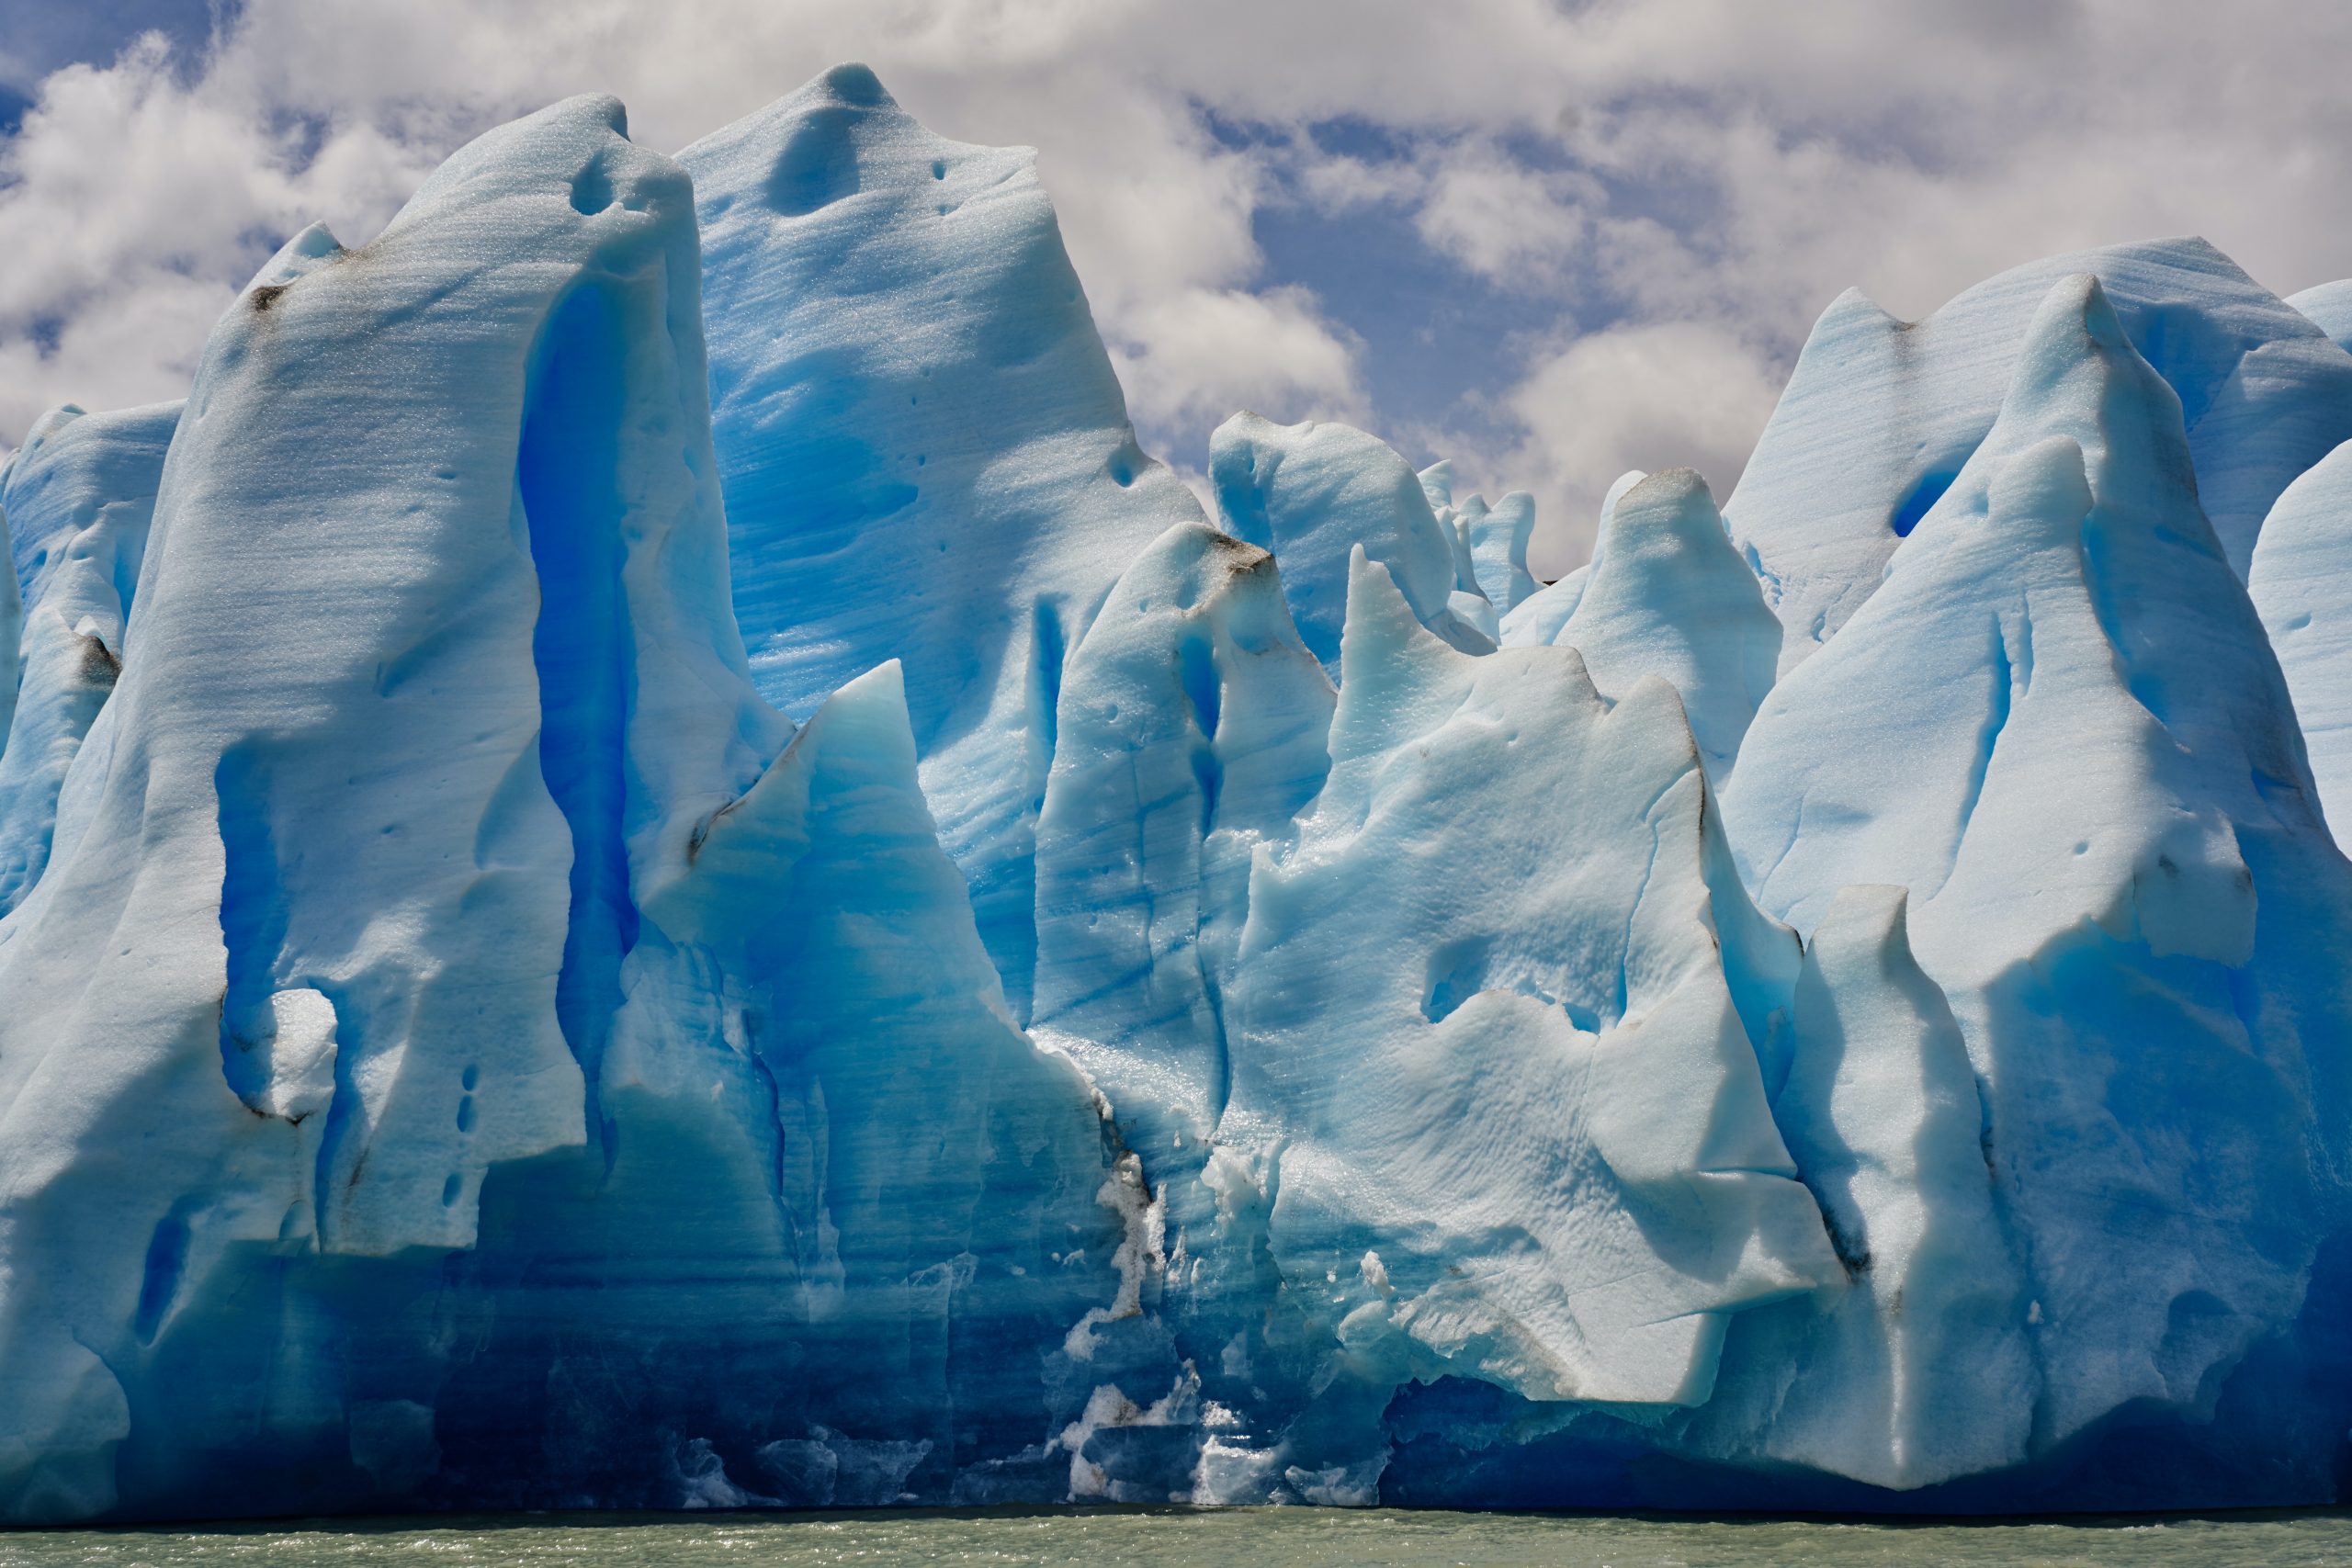 A close-up photograph of tall, white-blue icebergs. The sky above is a happy light blue with puffs of fluffy white clouds.